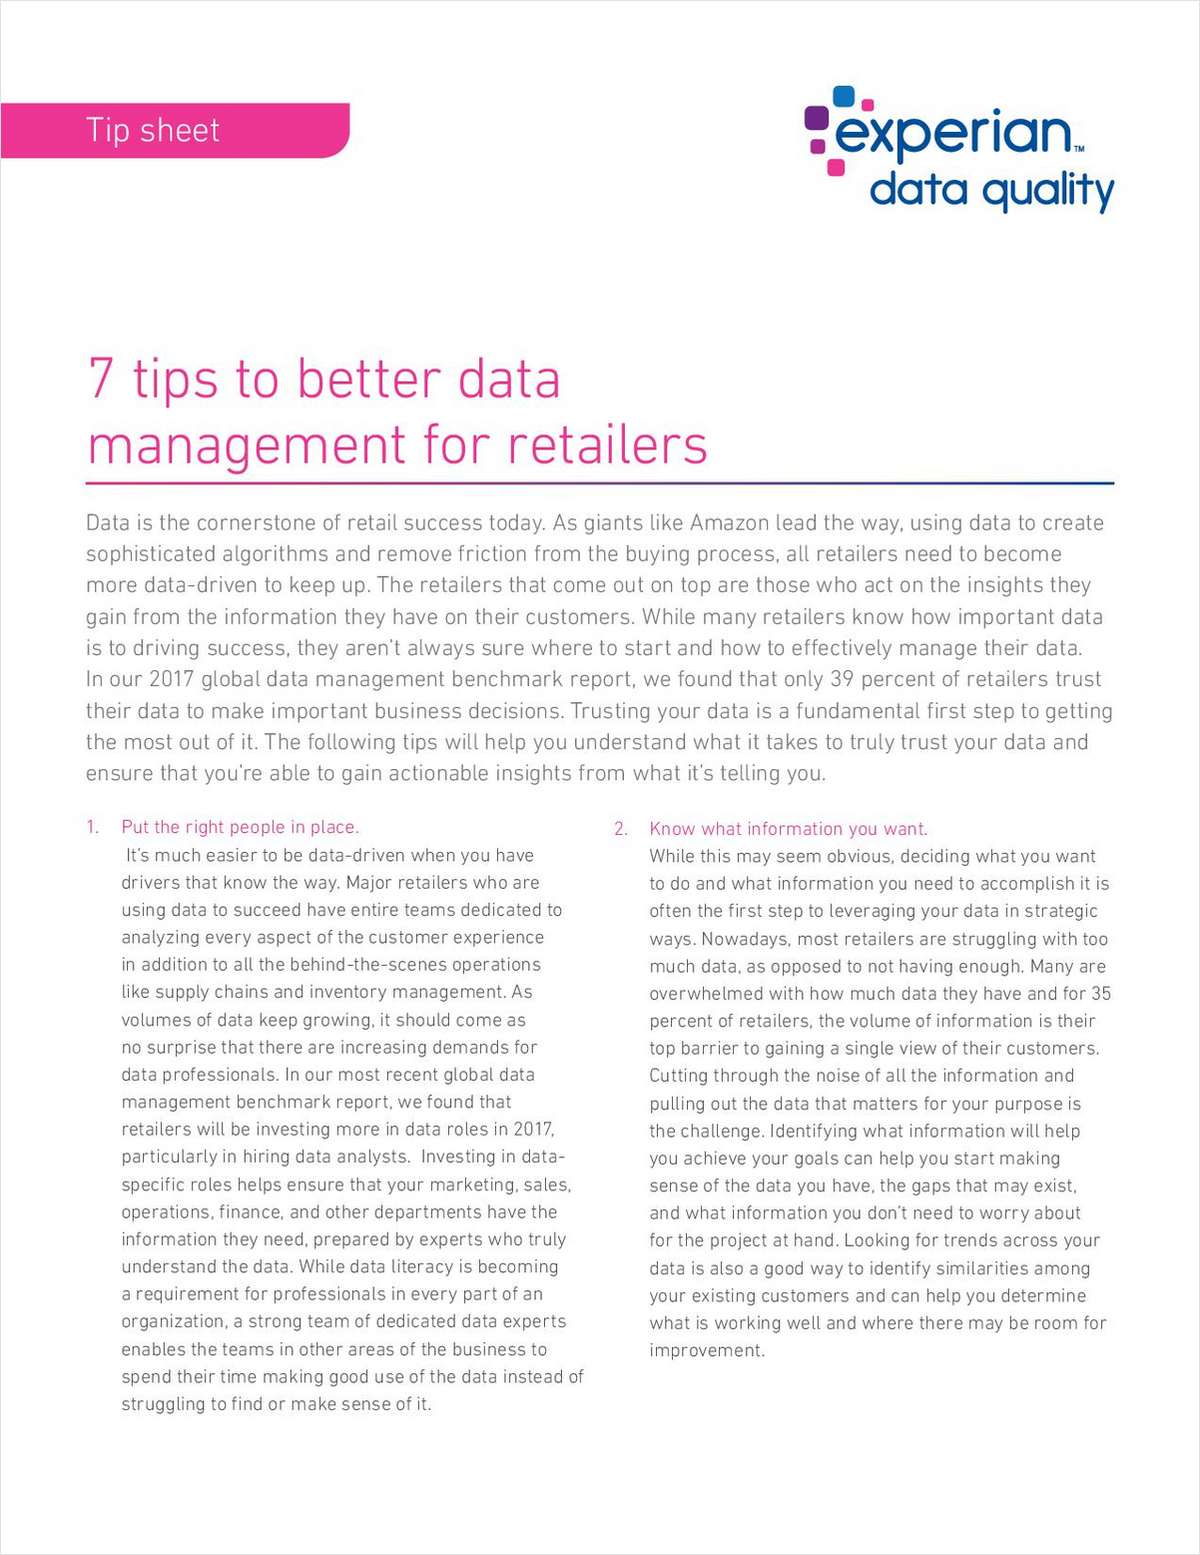 7 tips to better data management for retailers